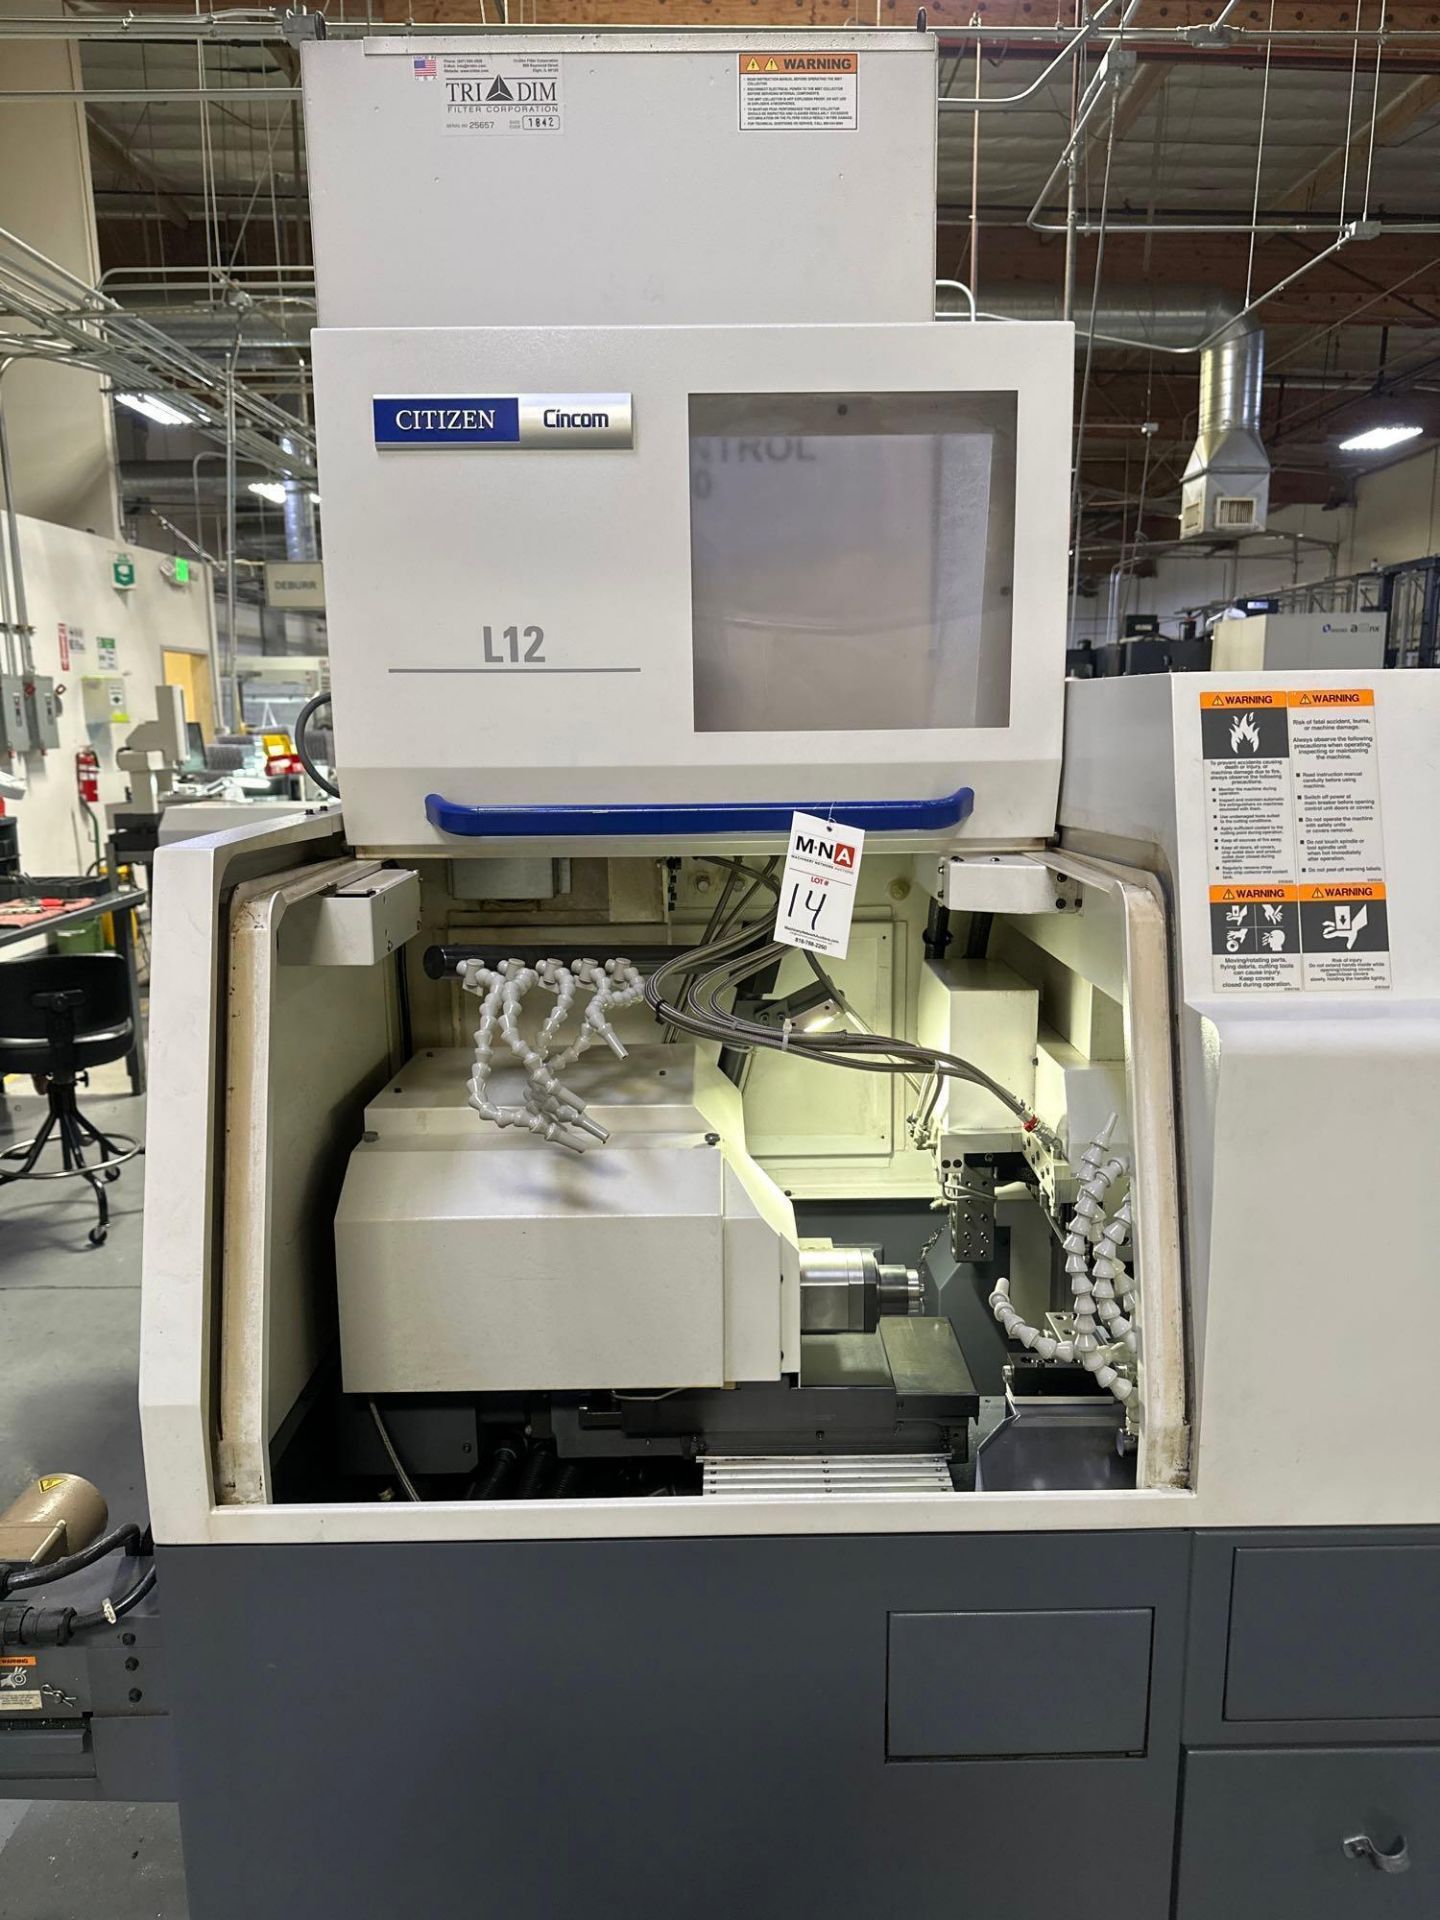 Citizen L12-1M7 6-Axis Swiss CNC Lathe, 18 Station Tool Holders *Delayed for sale in July* - Image 5 of 14